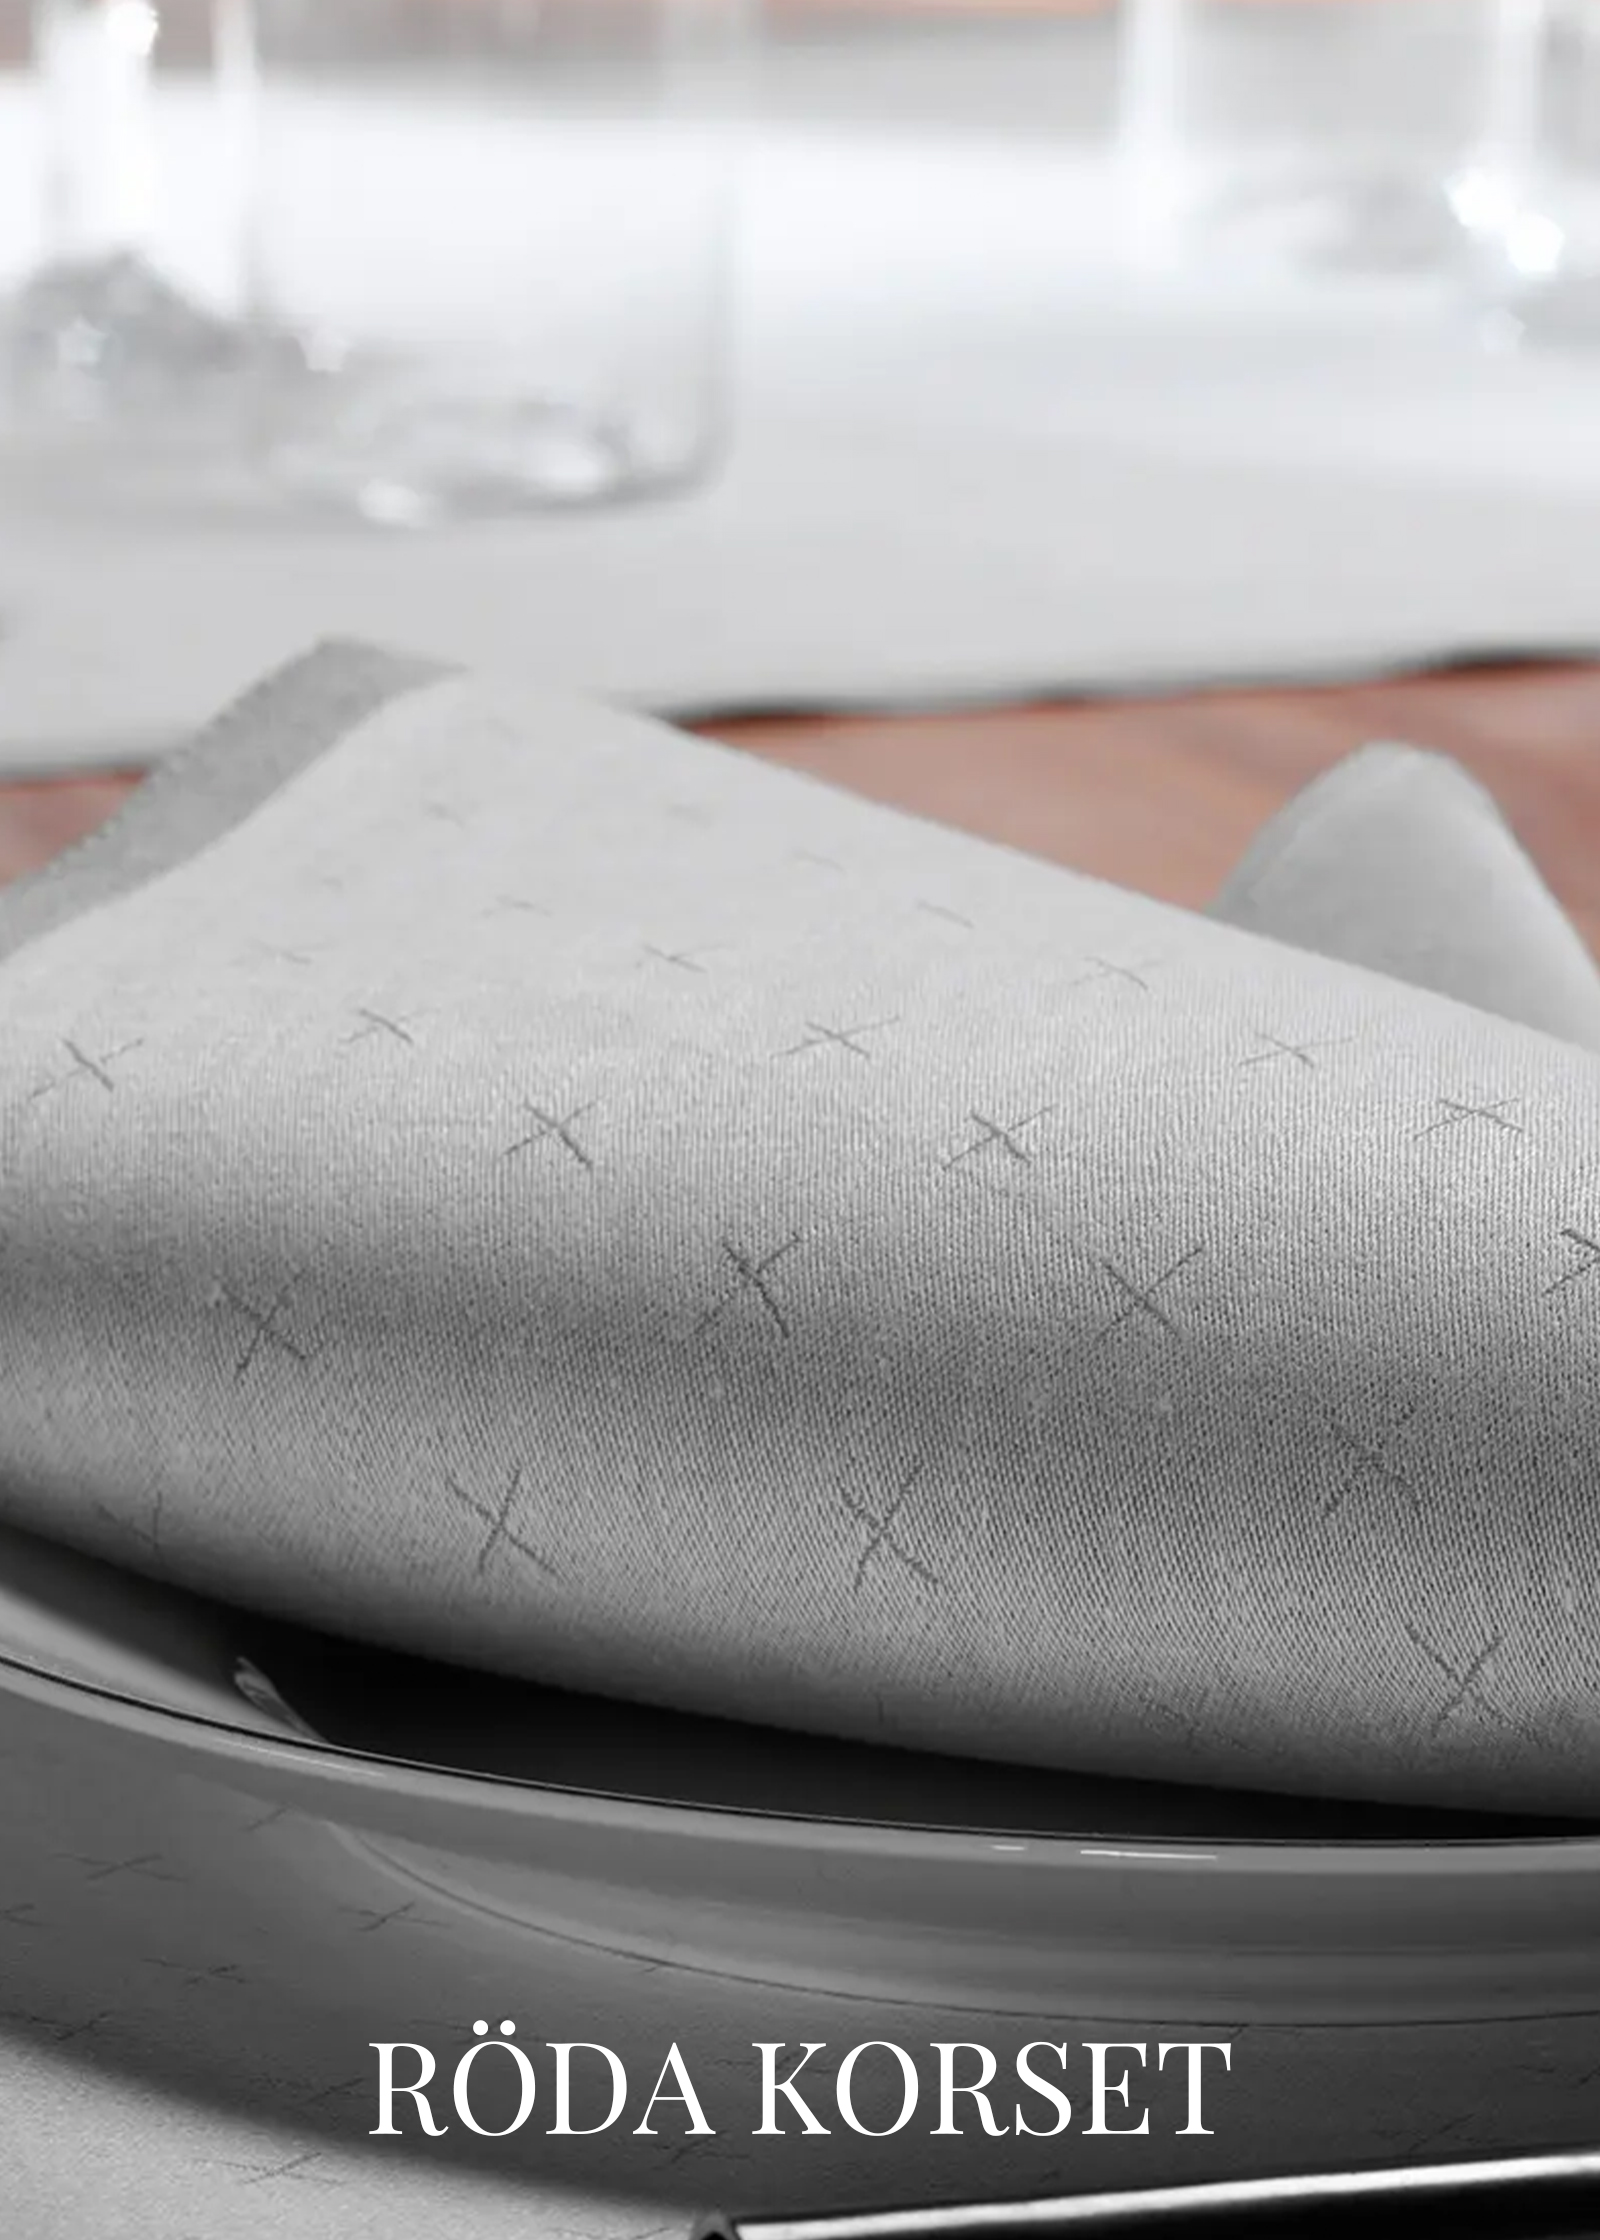 Collaboration with red cross and klässbols linen weaving - napkins and linen textiles in grey.